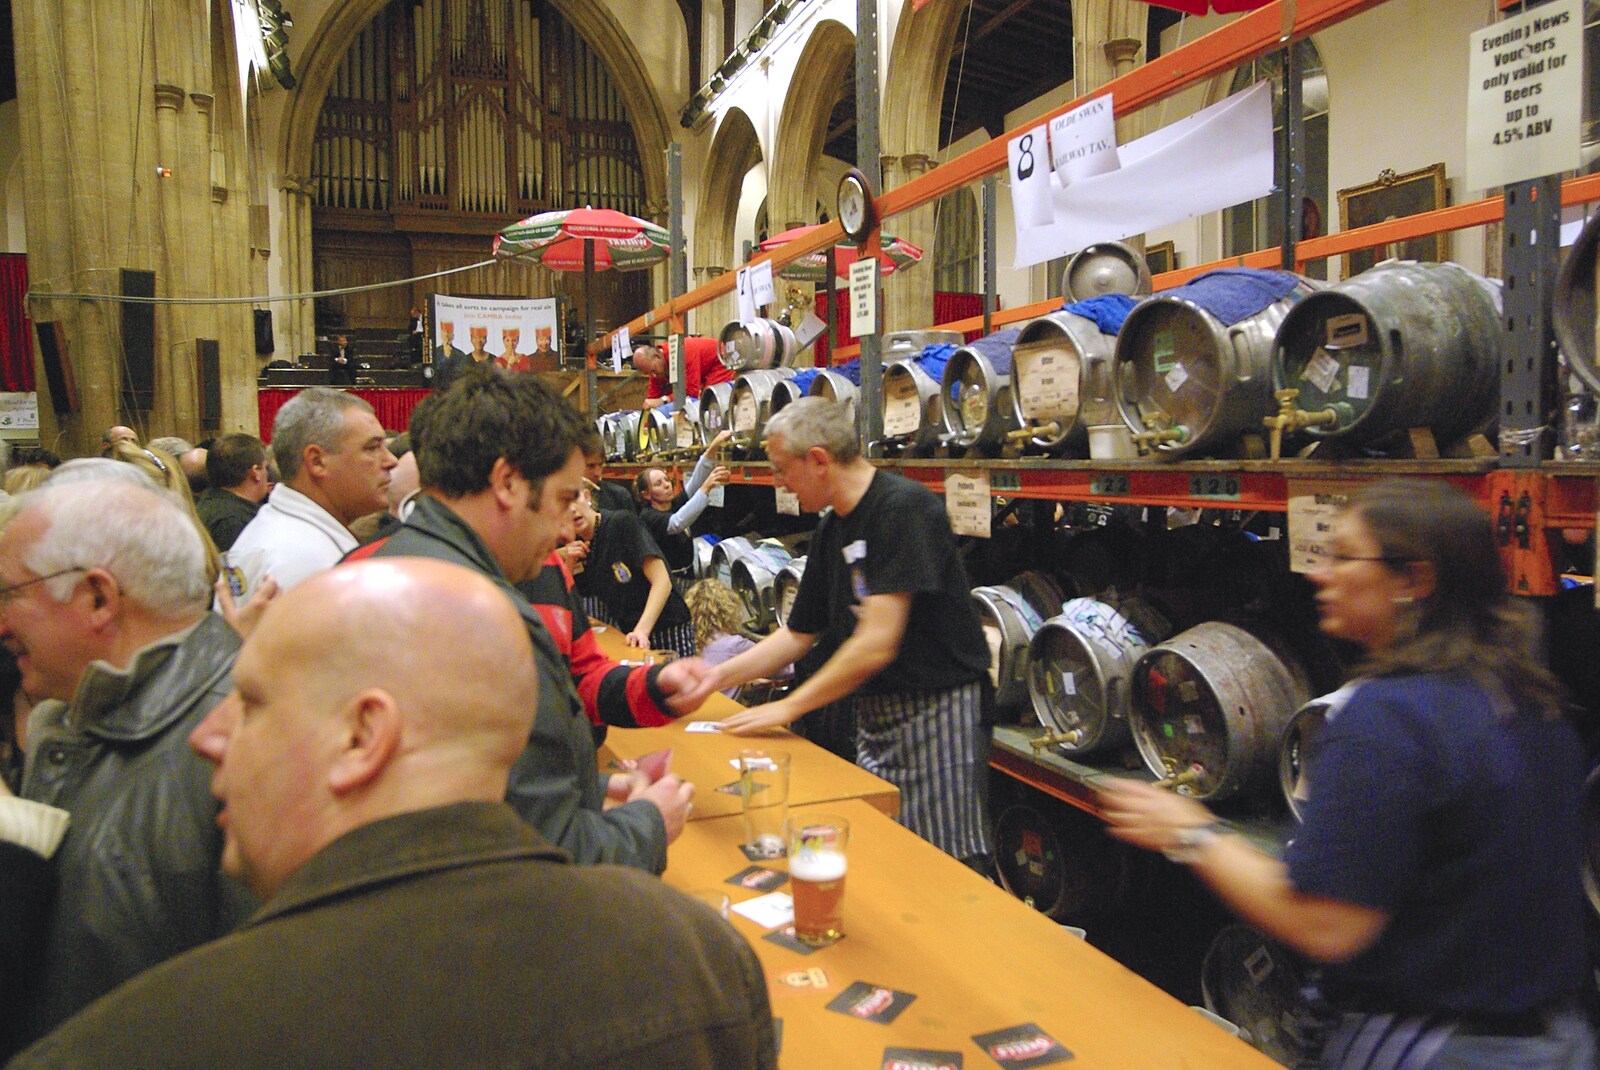 The 30th Norwich Beer Festival, St. Andrew's Hall, Norfolk - 24th October 2007: The barrels on stillage